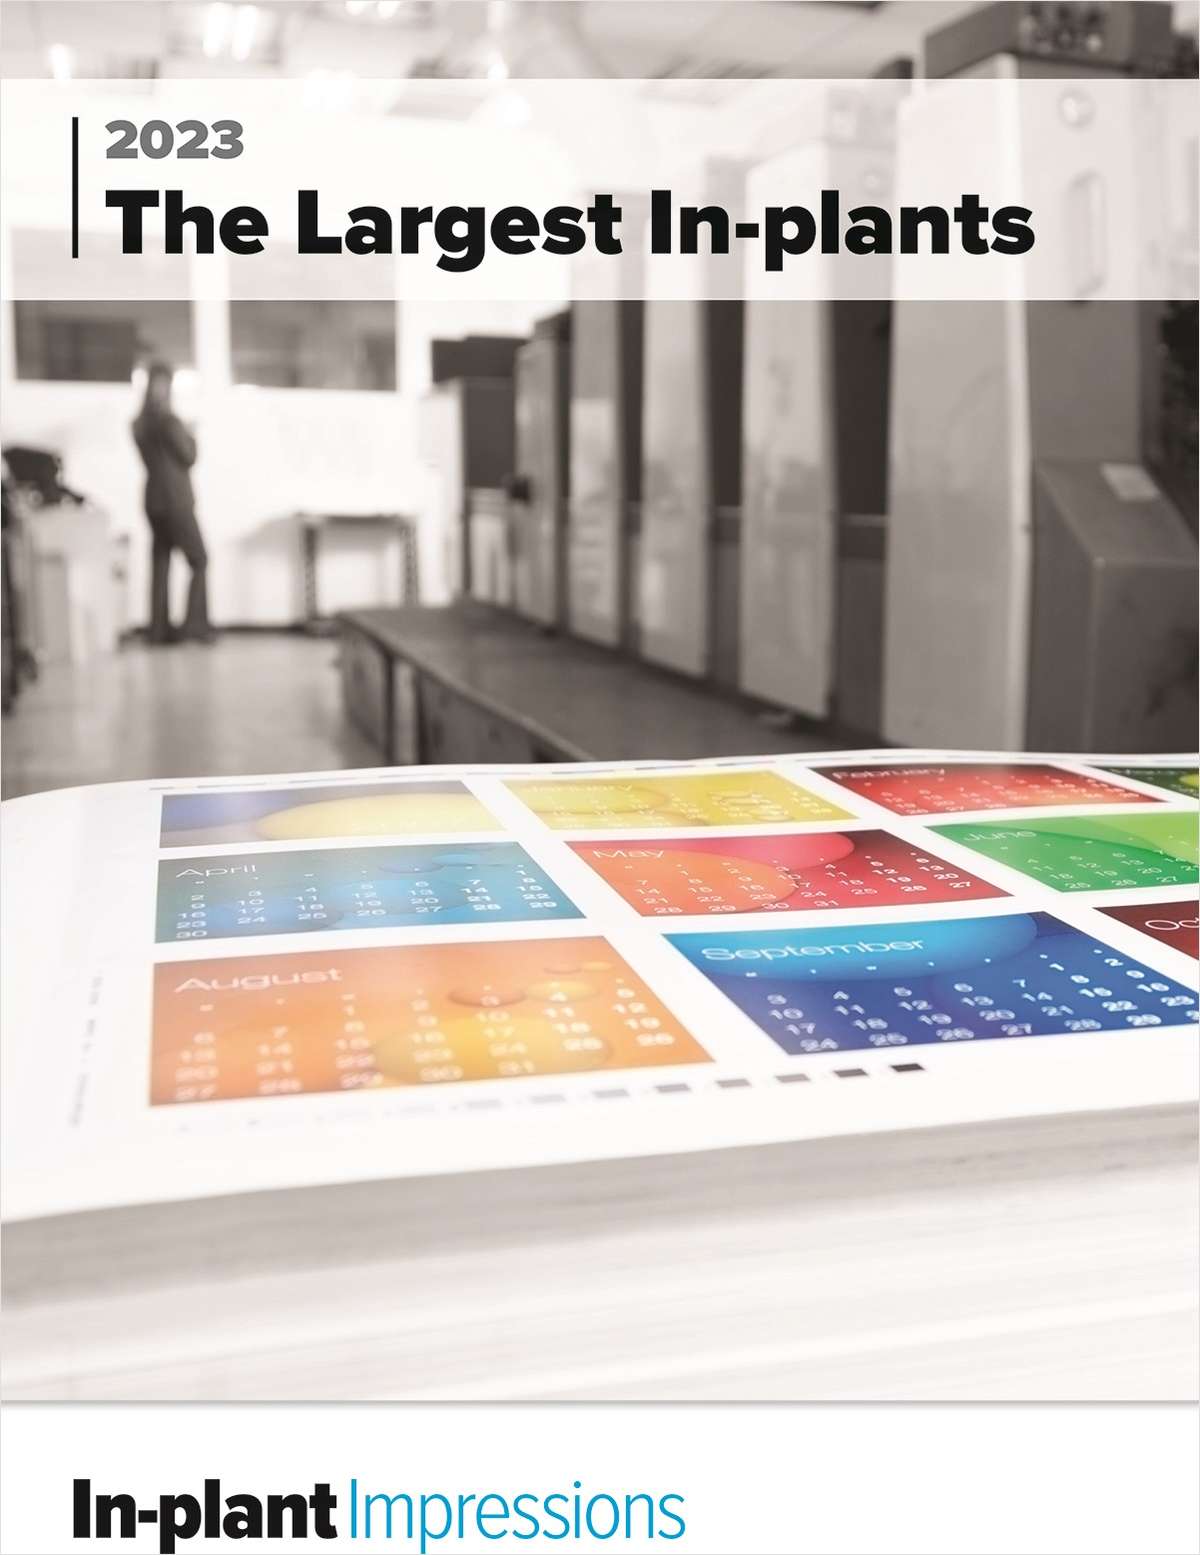 The Largest In-plants (2023)